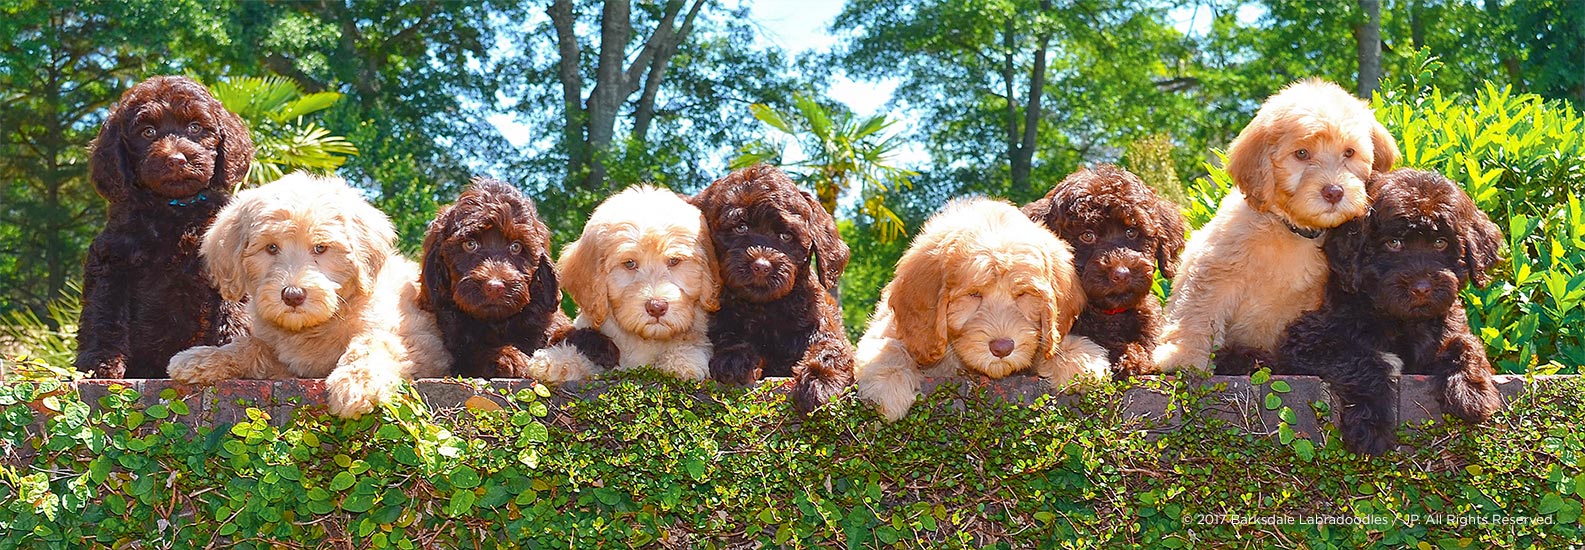 25 HQ Pictures Labradoodle Puppy Price Uk - Neutering Puppies At 6 Weeks Old Rspca And Labradoodle Breeders Should Hang Their Heads In Shame